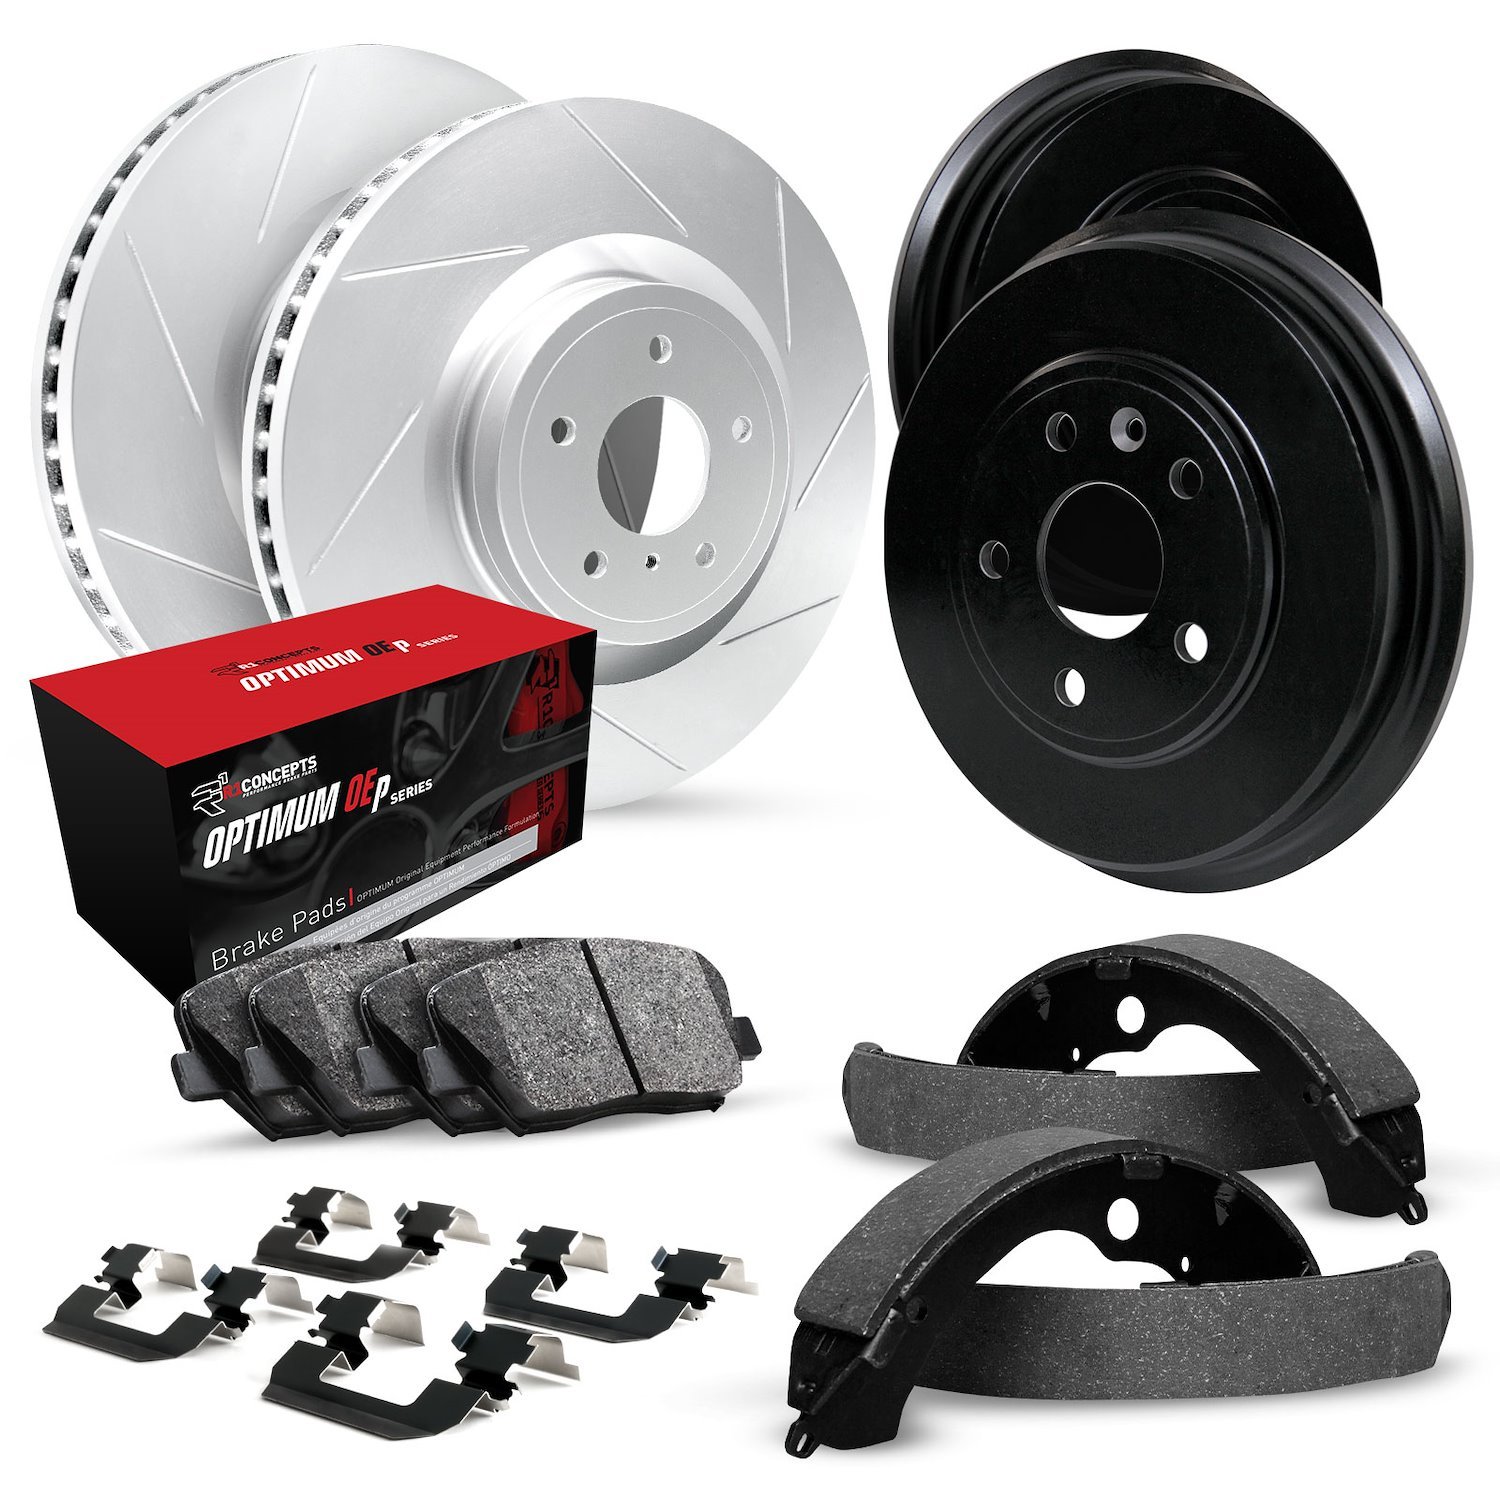 GEO-Carbon Slotted Brake Rotor & Drum Set w/Optimum OE Pads, Shoes, & Hardware, 1990-1994 Ford/Lincoln/Mercury/Mazda